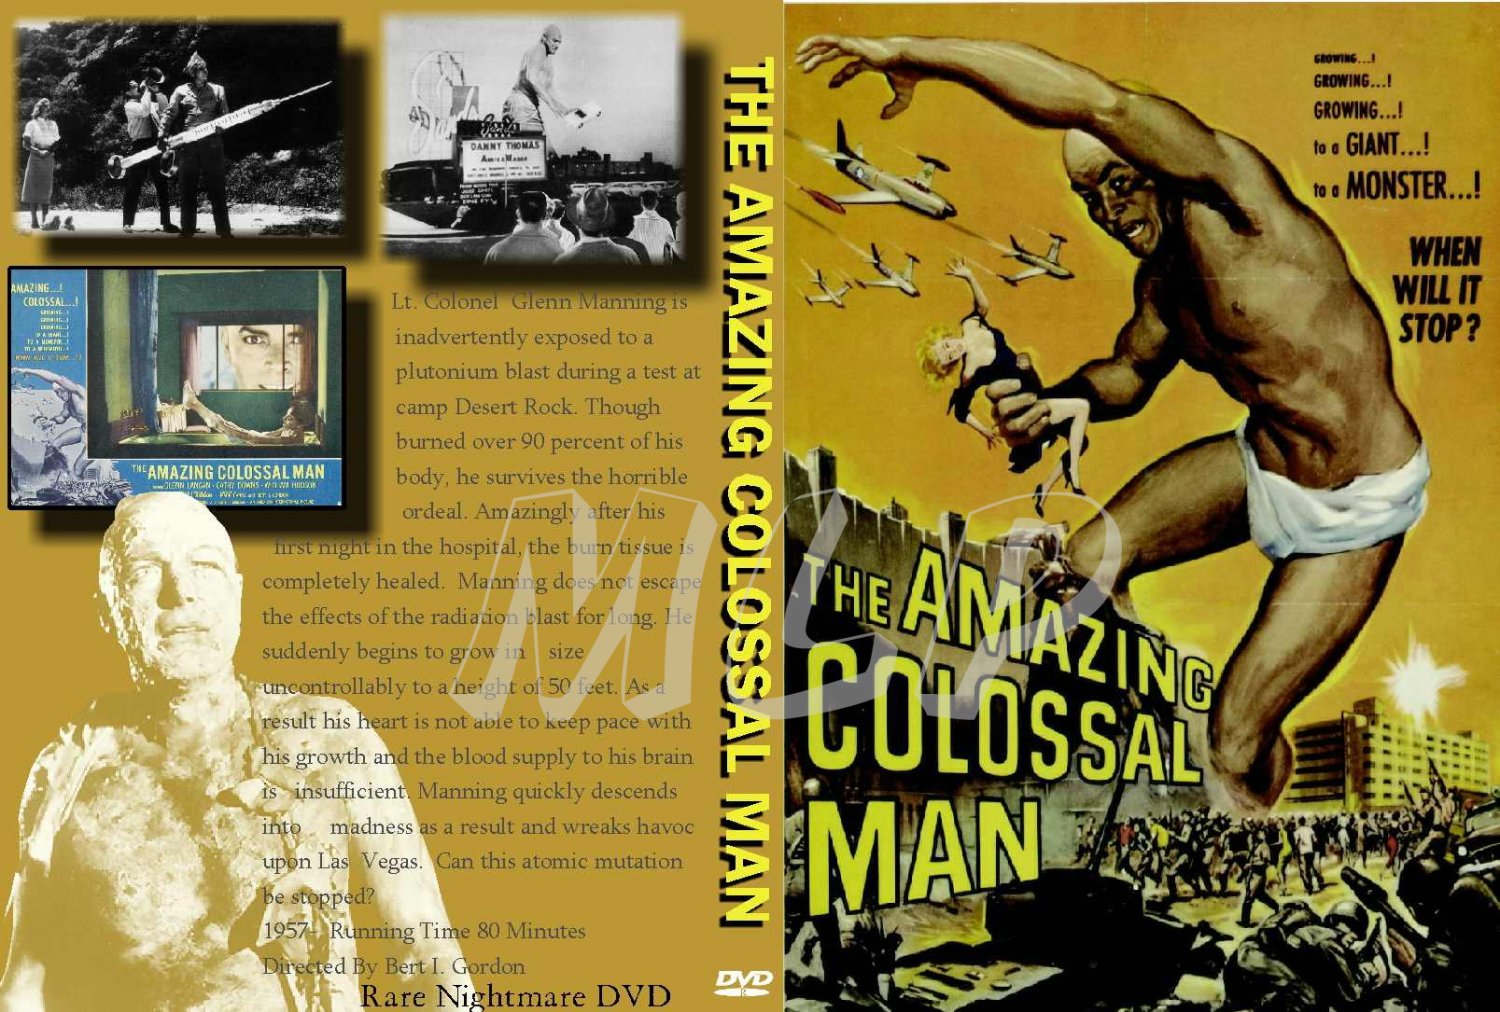 The Amazing Colossal Man #3